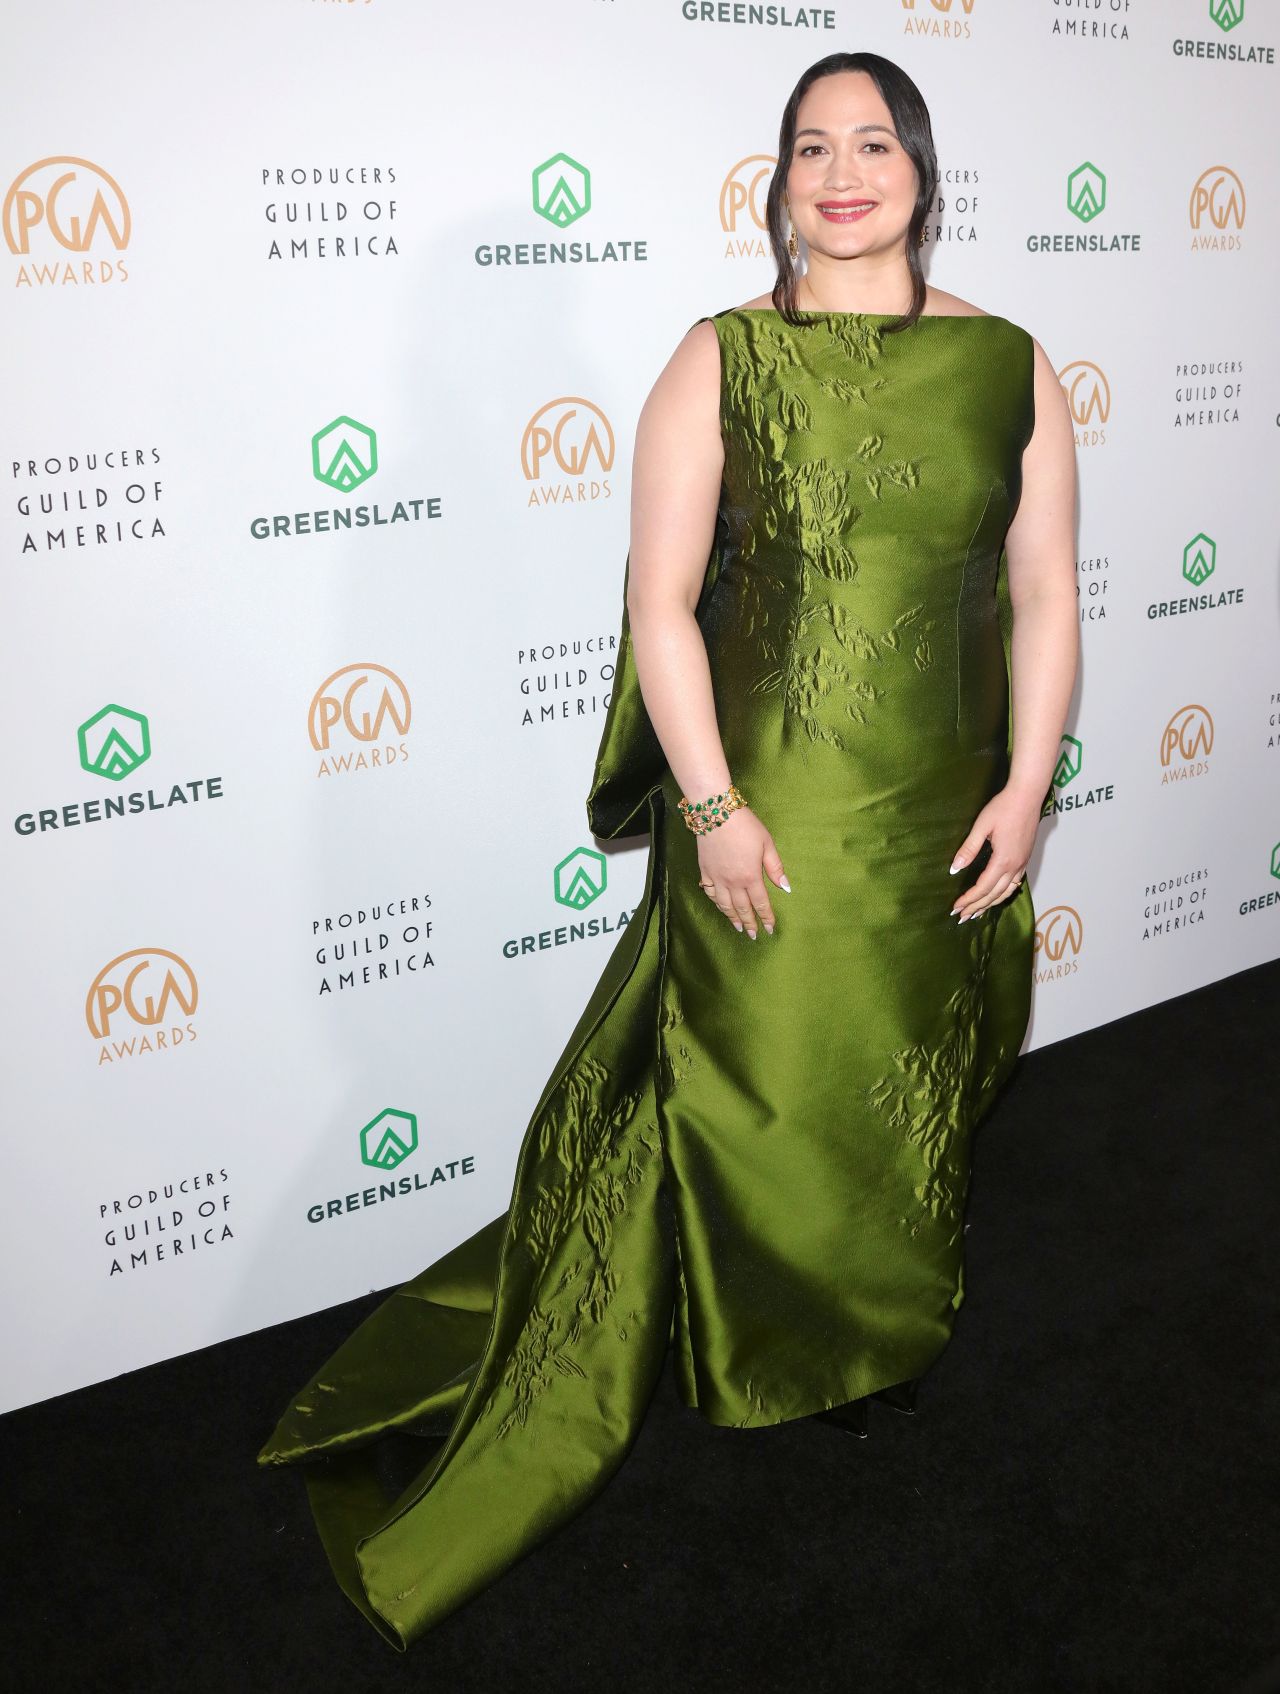 LILY GLADSTONE AT PRODUCERS GUILD AWARDS IN LOS ANGELES